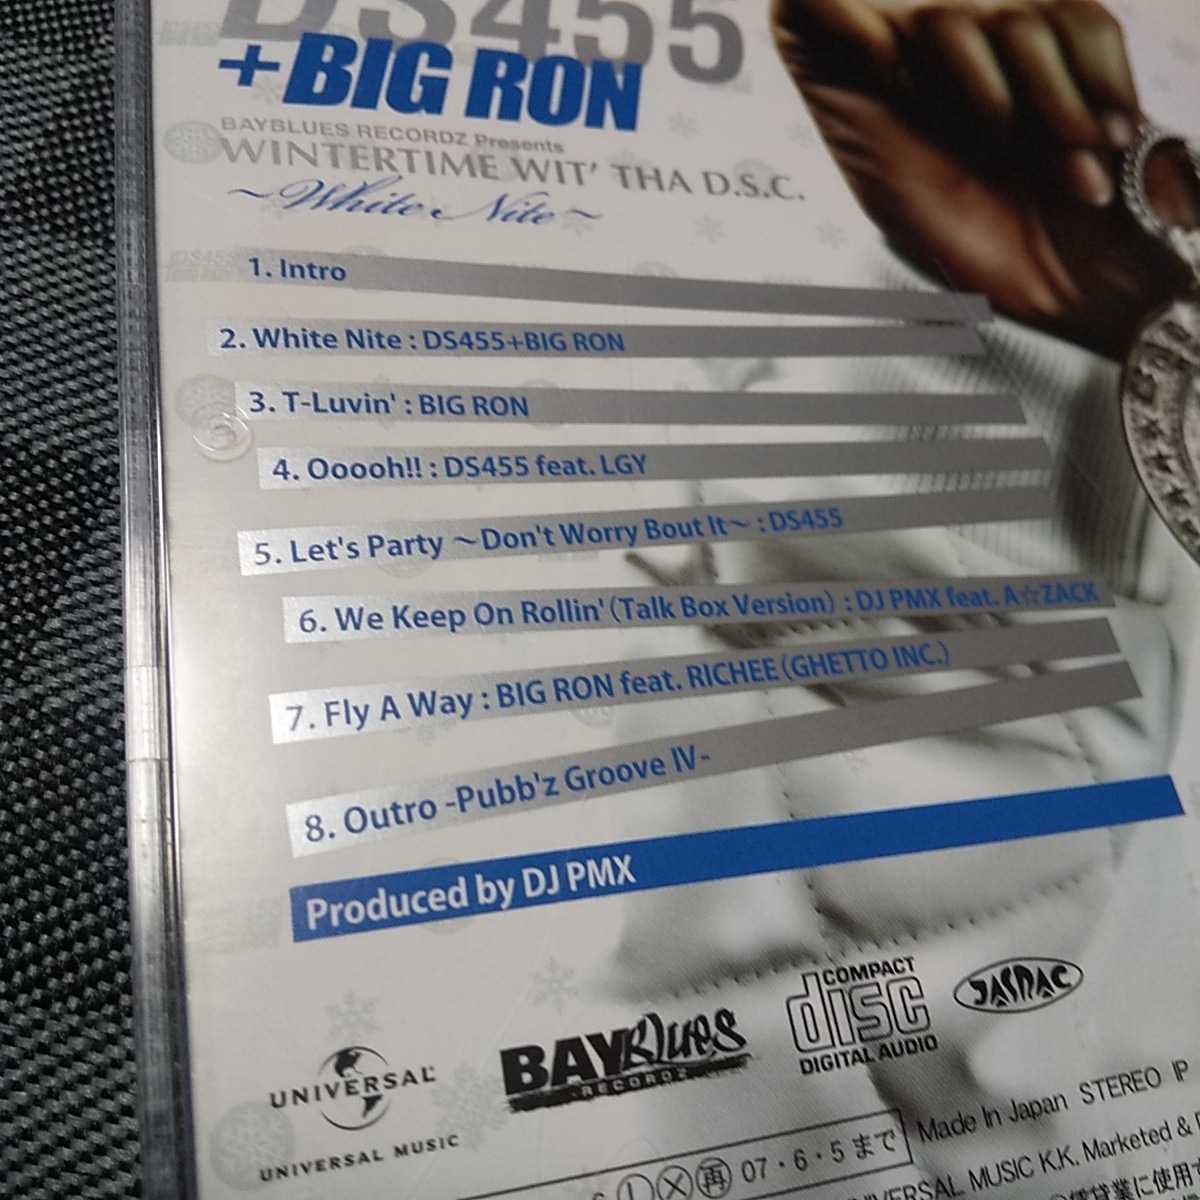 CD【DS455+BIG RON wintertime wit'tha d.s.c】2006年　［送料無料］返金保証あり